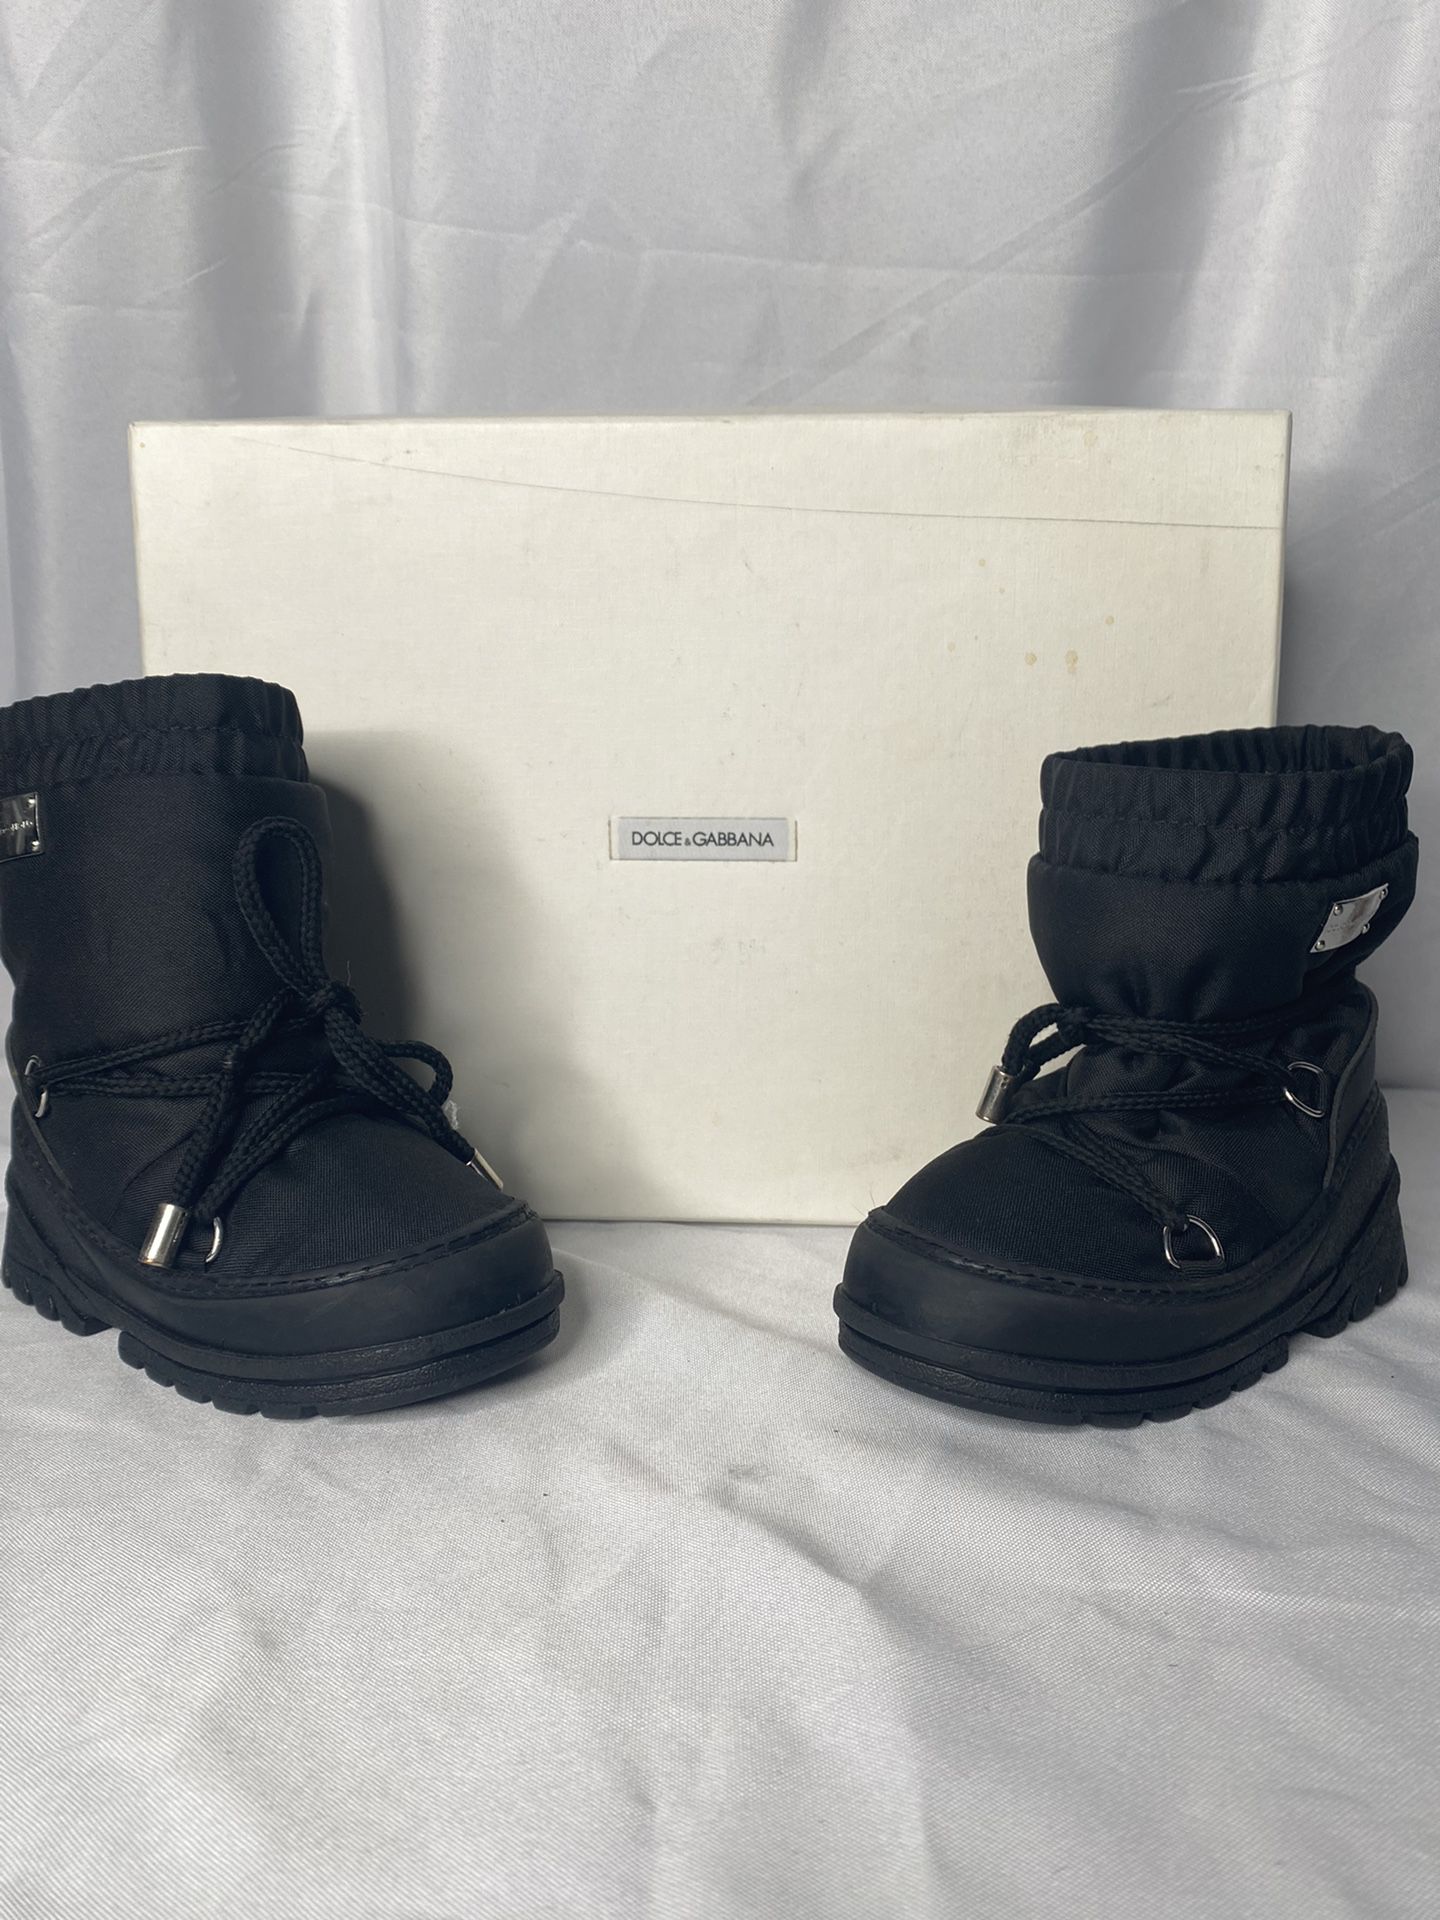 Dolce And Gabbana Snow Boots For Toddler Size 27